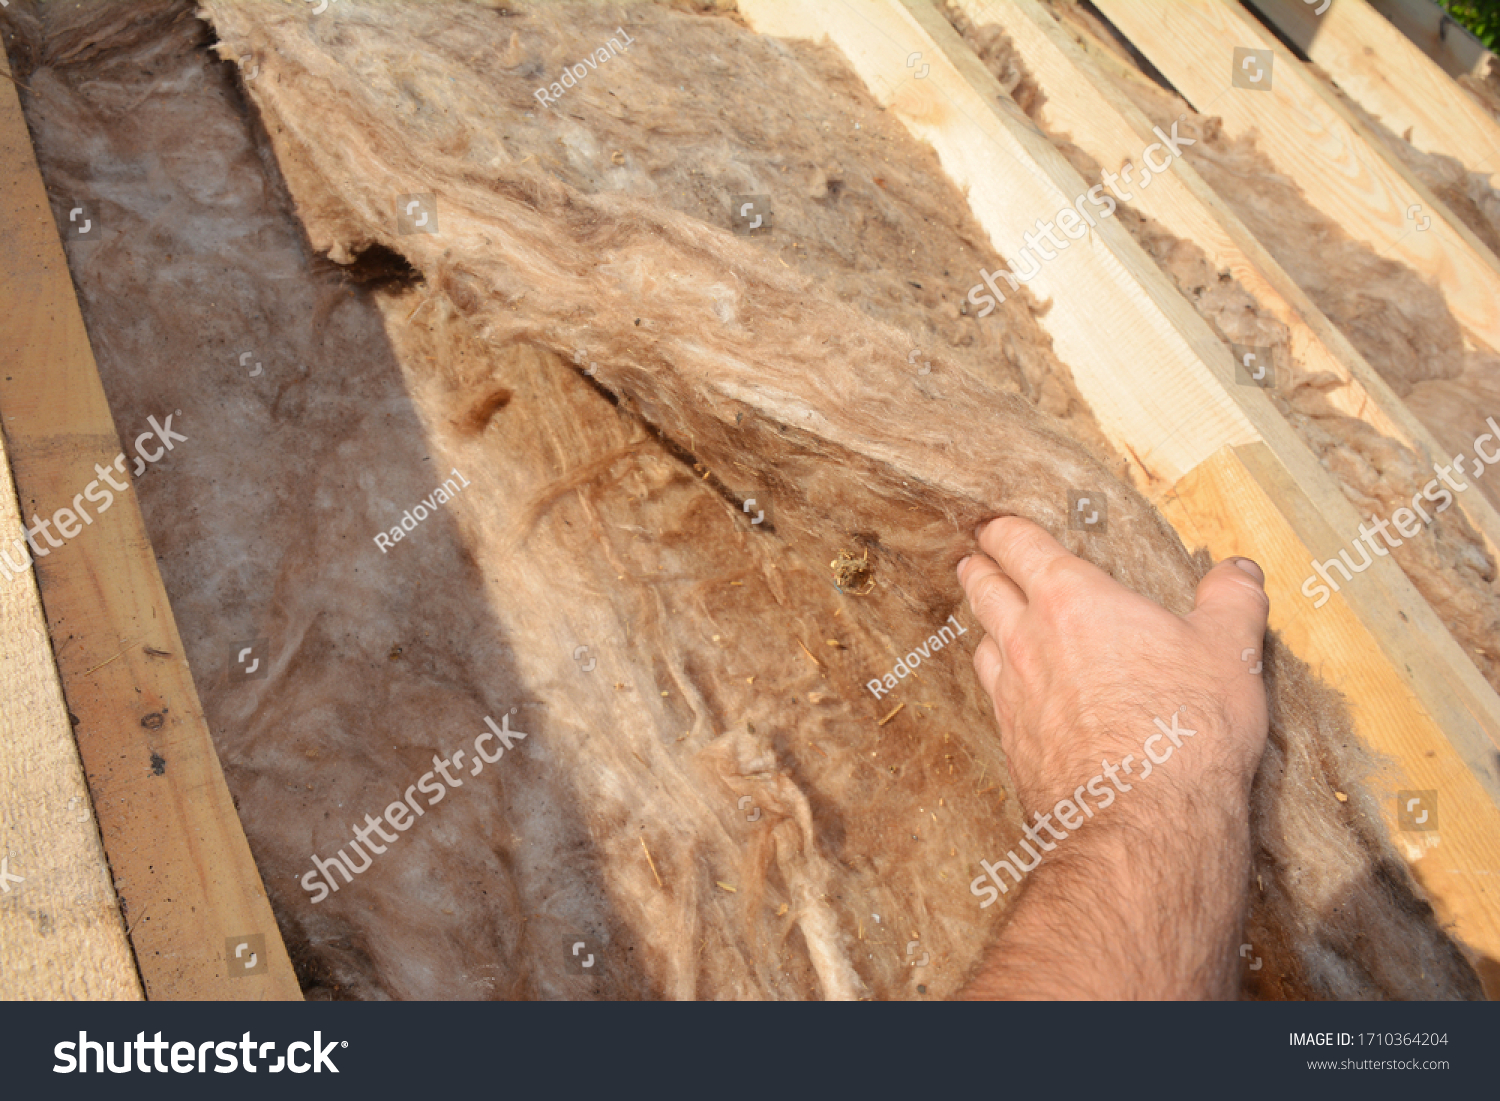 A bad example, mistake of a building contractor applying thermal mineral, glass wool batt insulation without protective gloves under the roof sheathing, between trusses constructing the roof. #1710364204